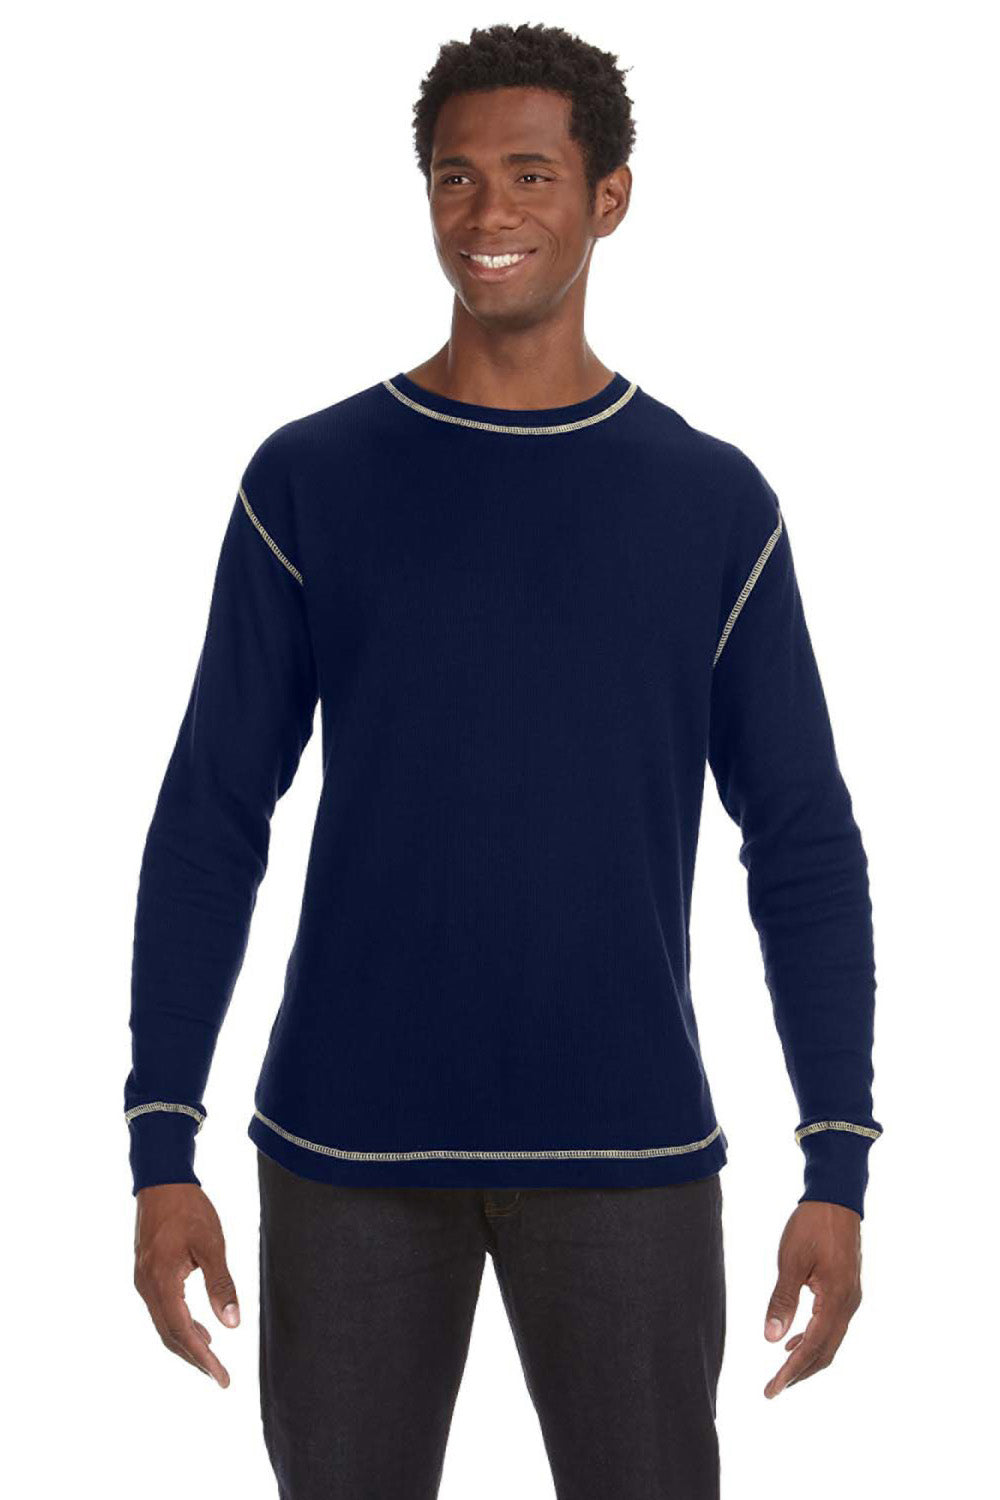 navy blue thermal top